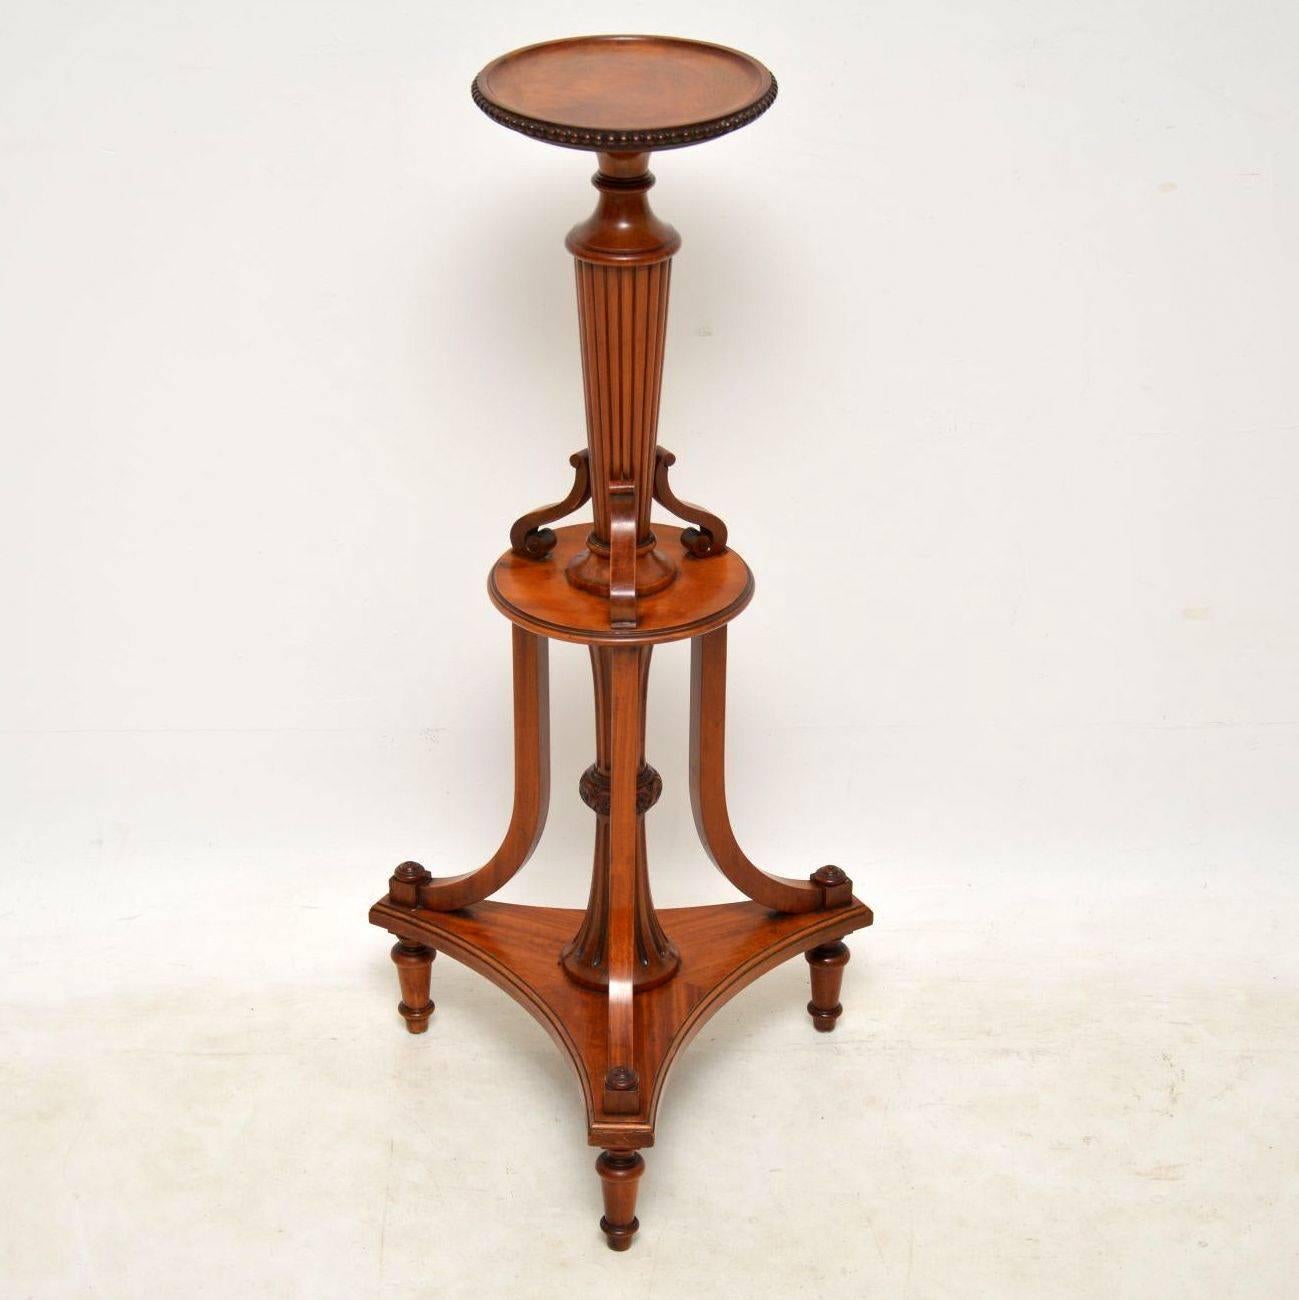 Antique Victorian satinwood jardiniere with some wonderful details and in good original condition. This is quite an unusual, rare item and not one I have come across before. Please enlarge all the images to see all the fine details. I would date